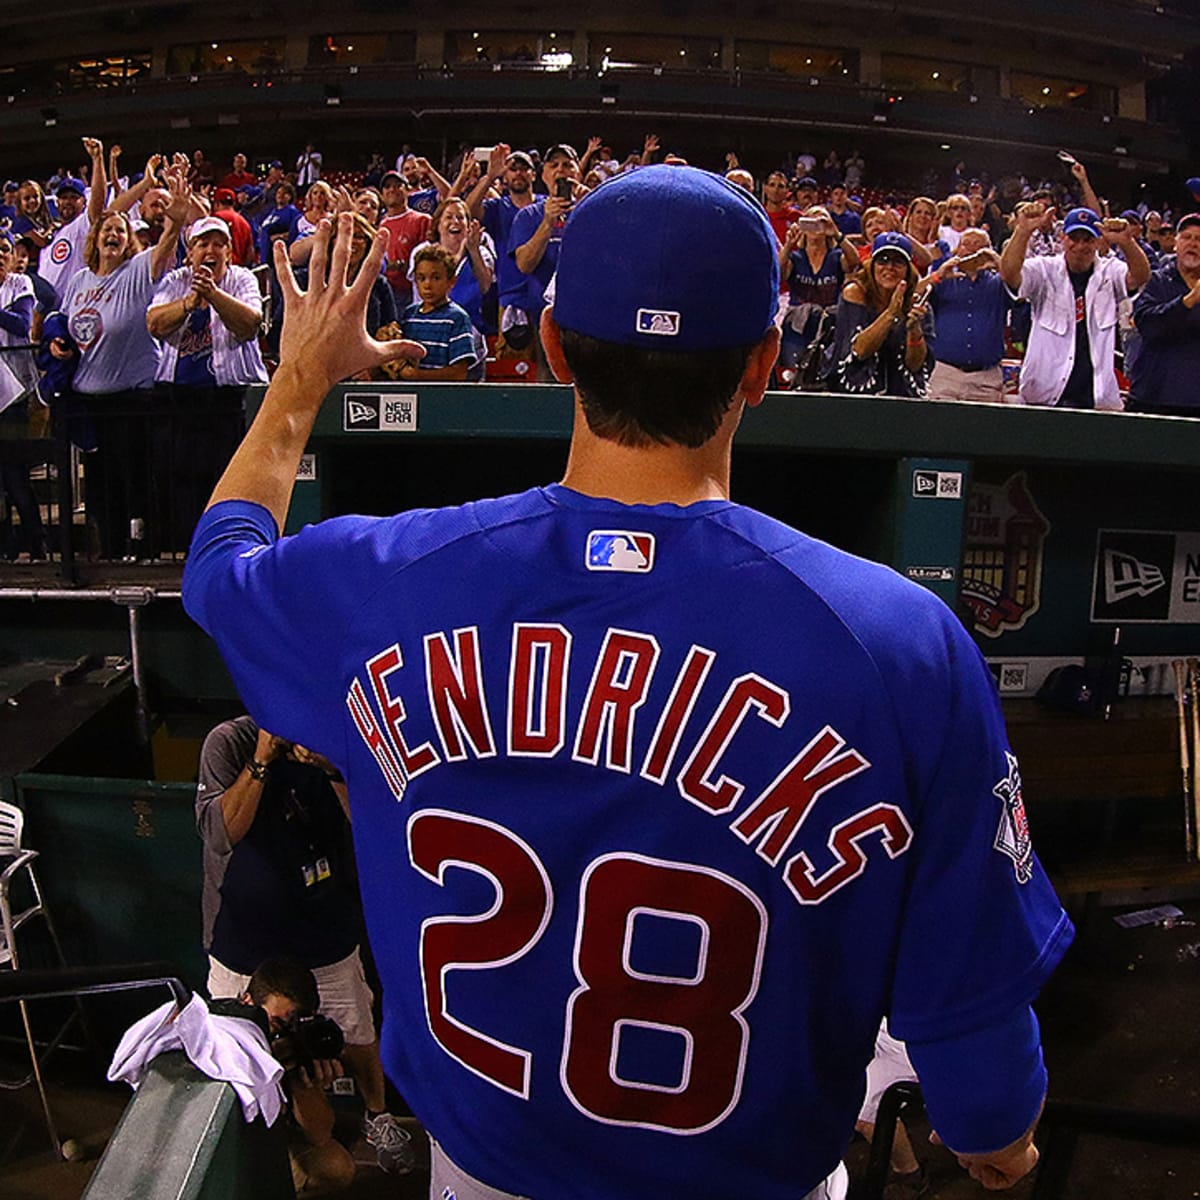 Cubs' Kyle Hendricks carries no-hitter into eighth inning vs. Giants -  Chicago Sun-Times